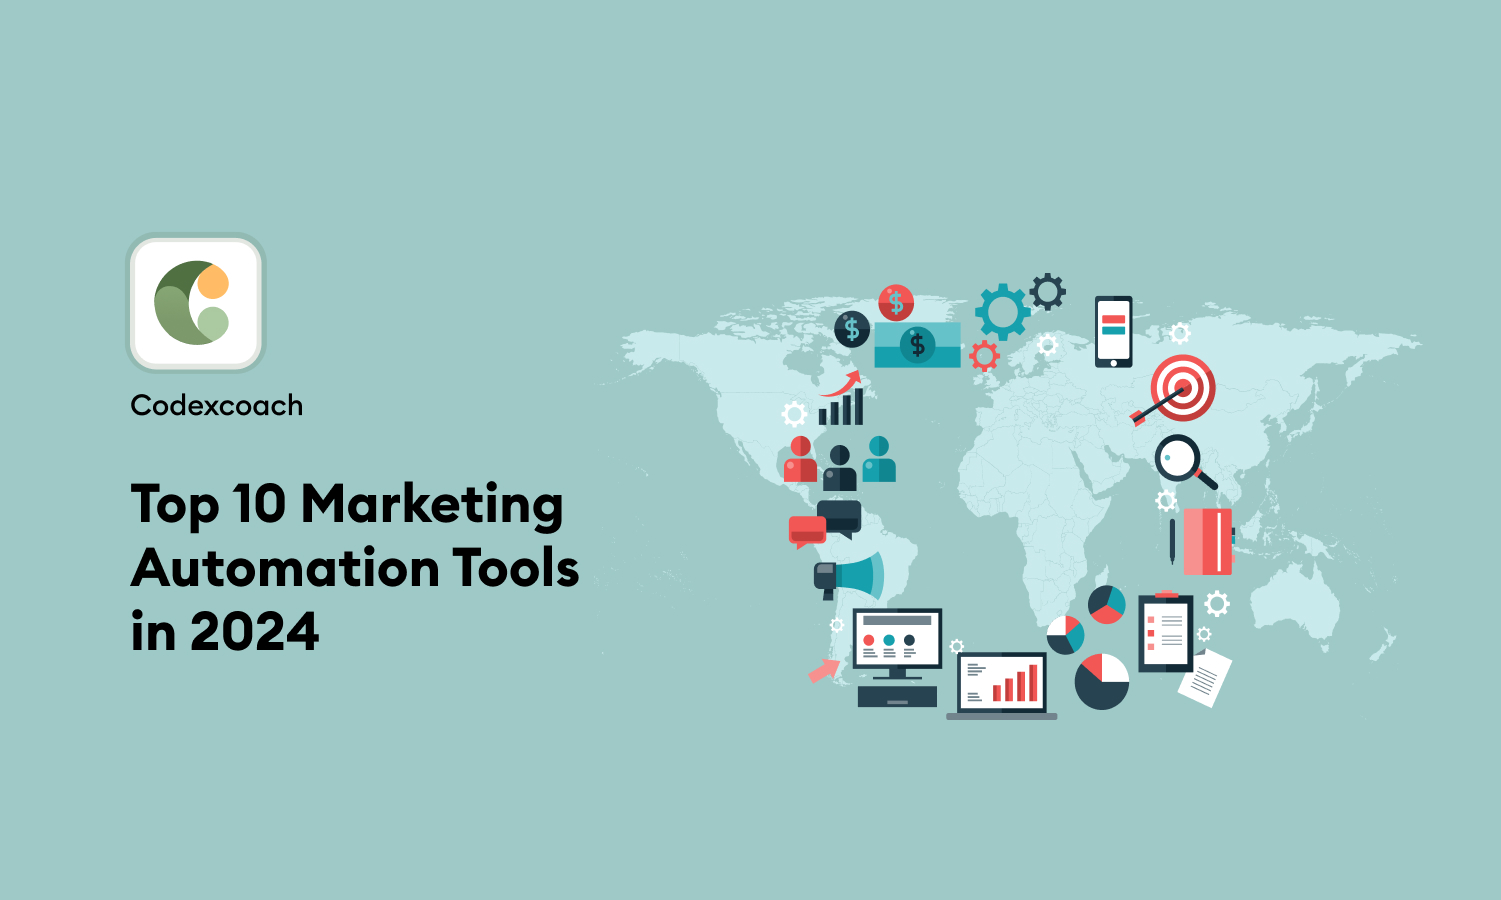 Top 10 Marketing Automation Tools in 2024